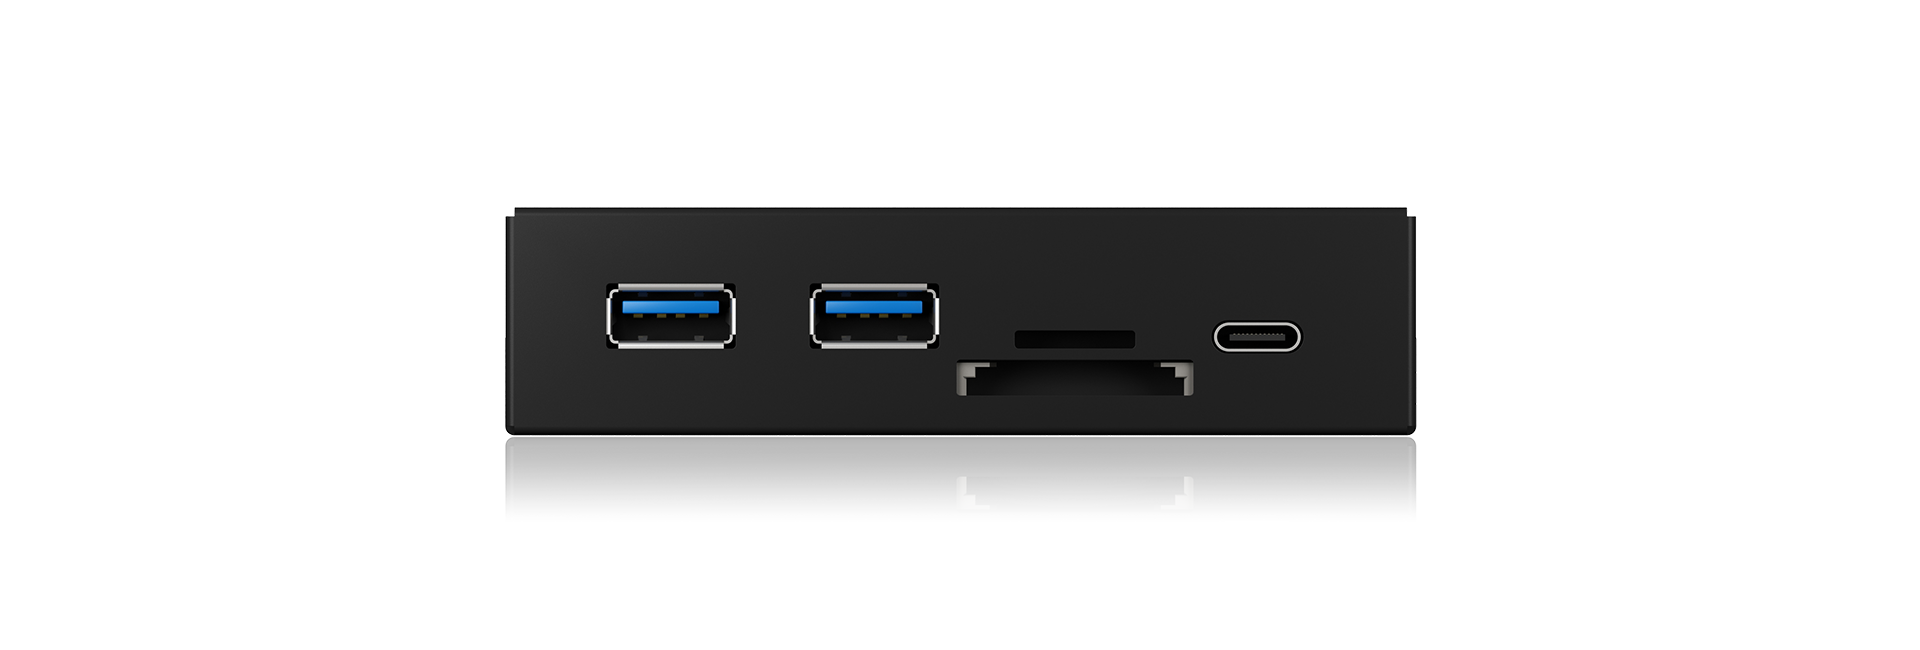 ICY BOX IB-HUB1417-i3 Frontpanel with USB 3.0 Type-C and Type-A hub with card reader - image3